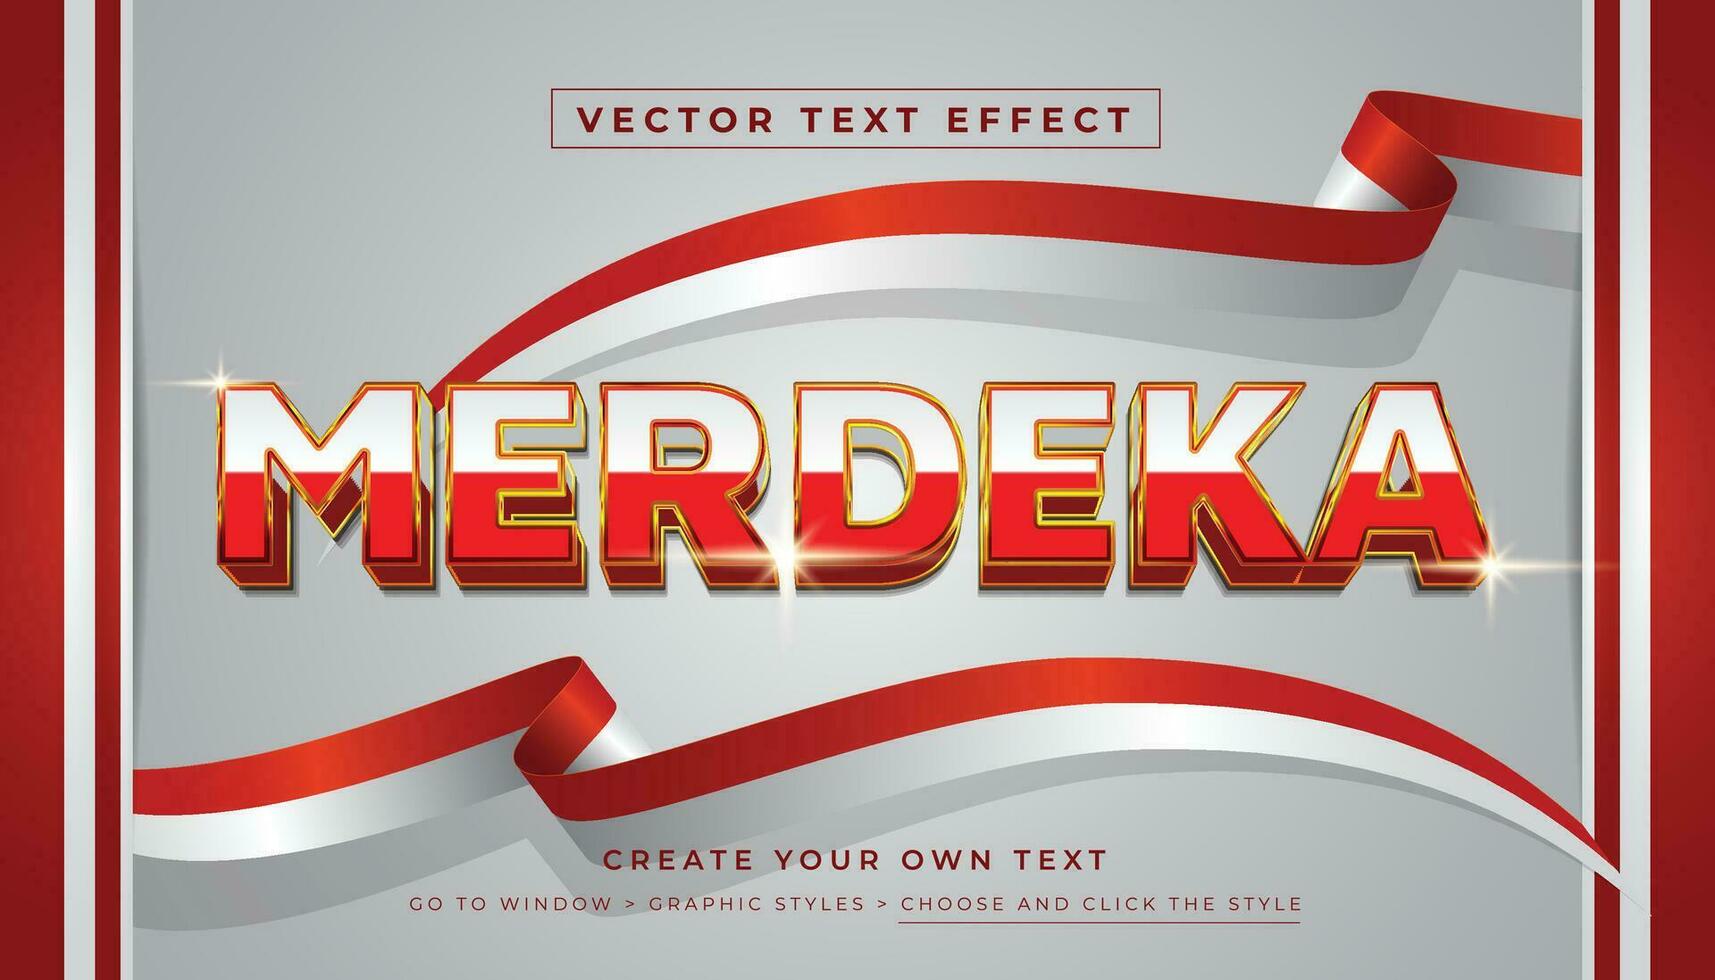 Editable vector Indonesia merdeka gold text effect. Independence day of Indonesia graphic style on merah putih background